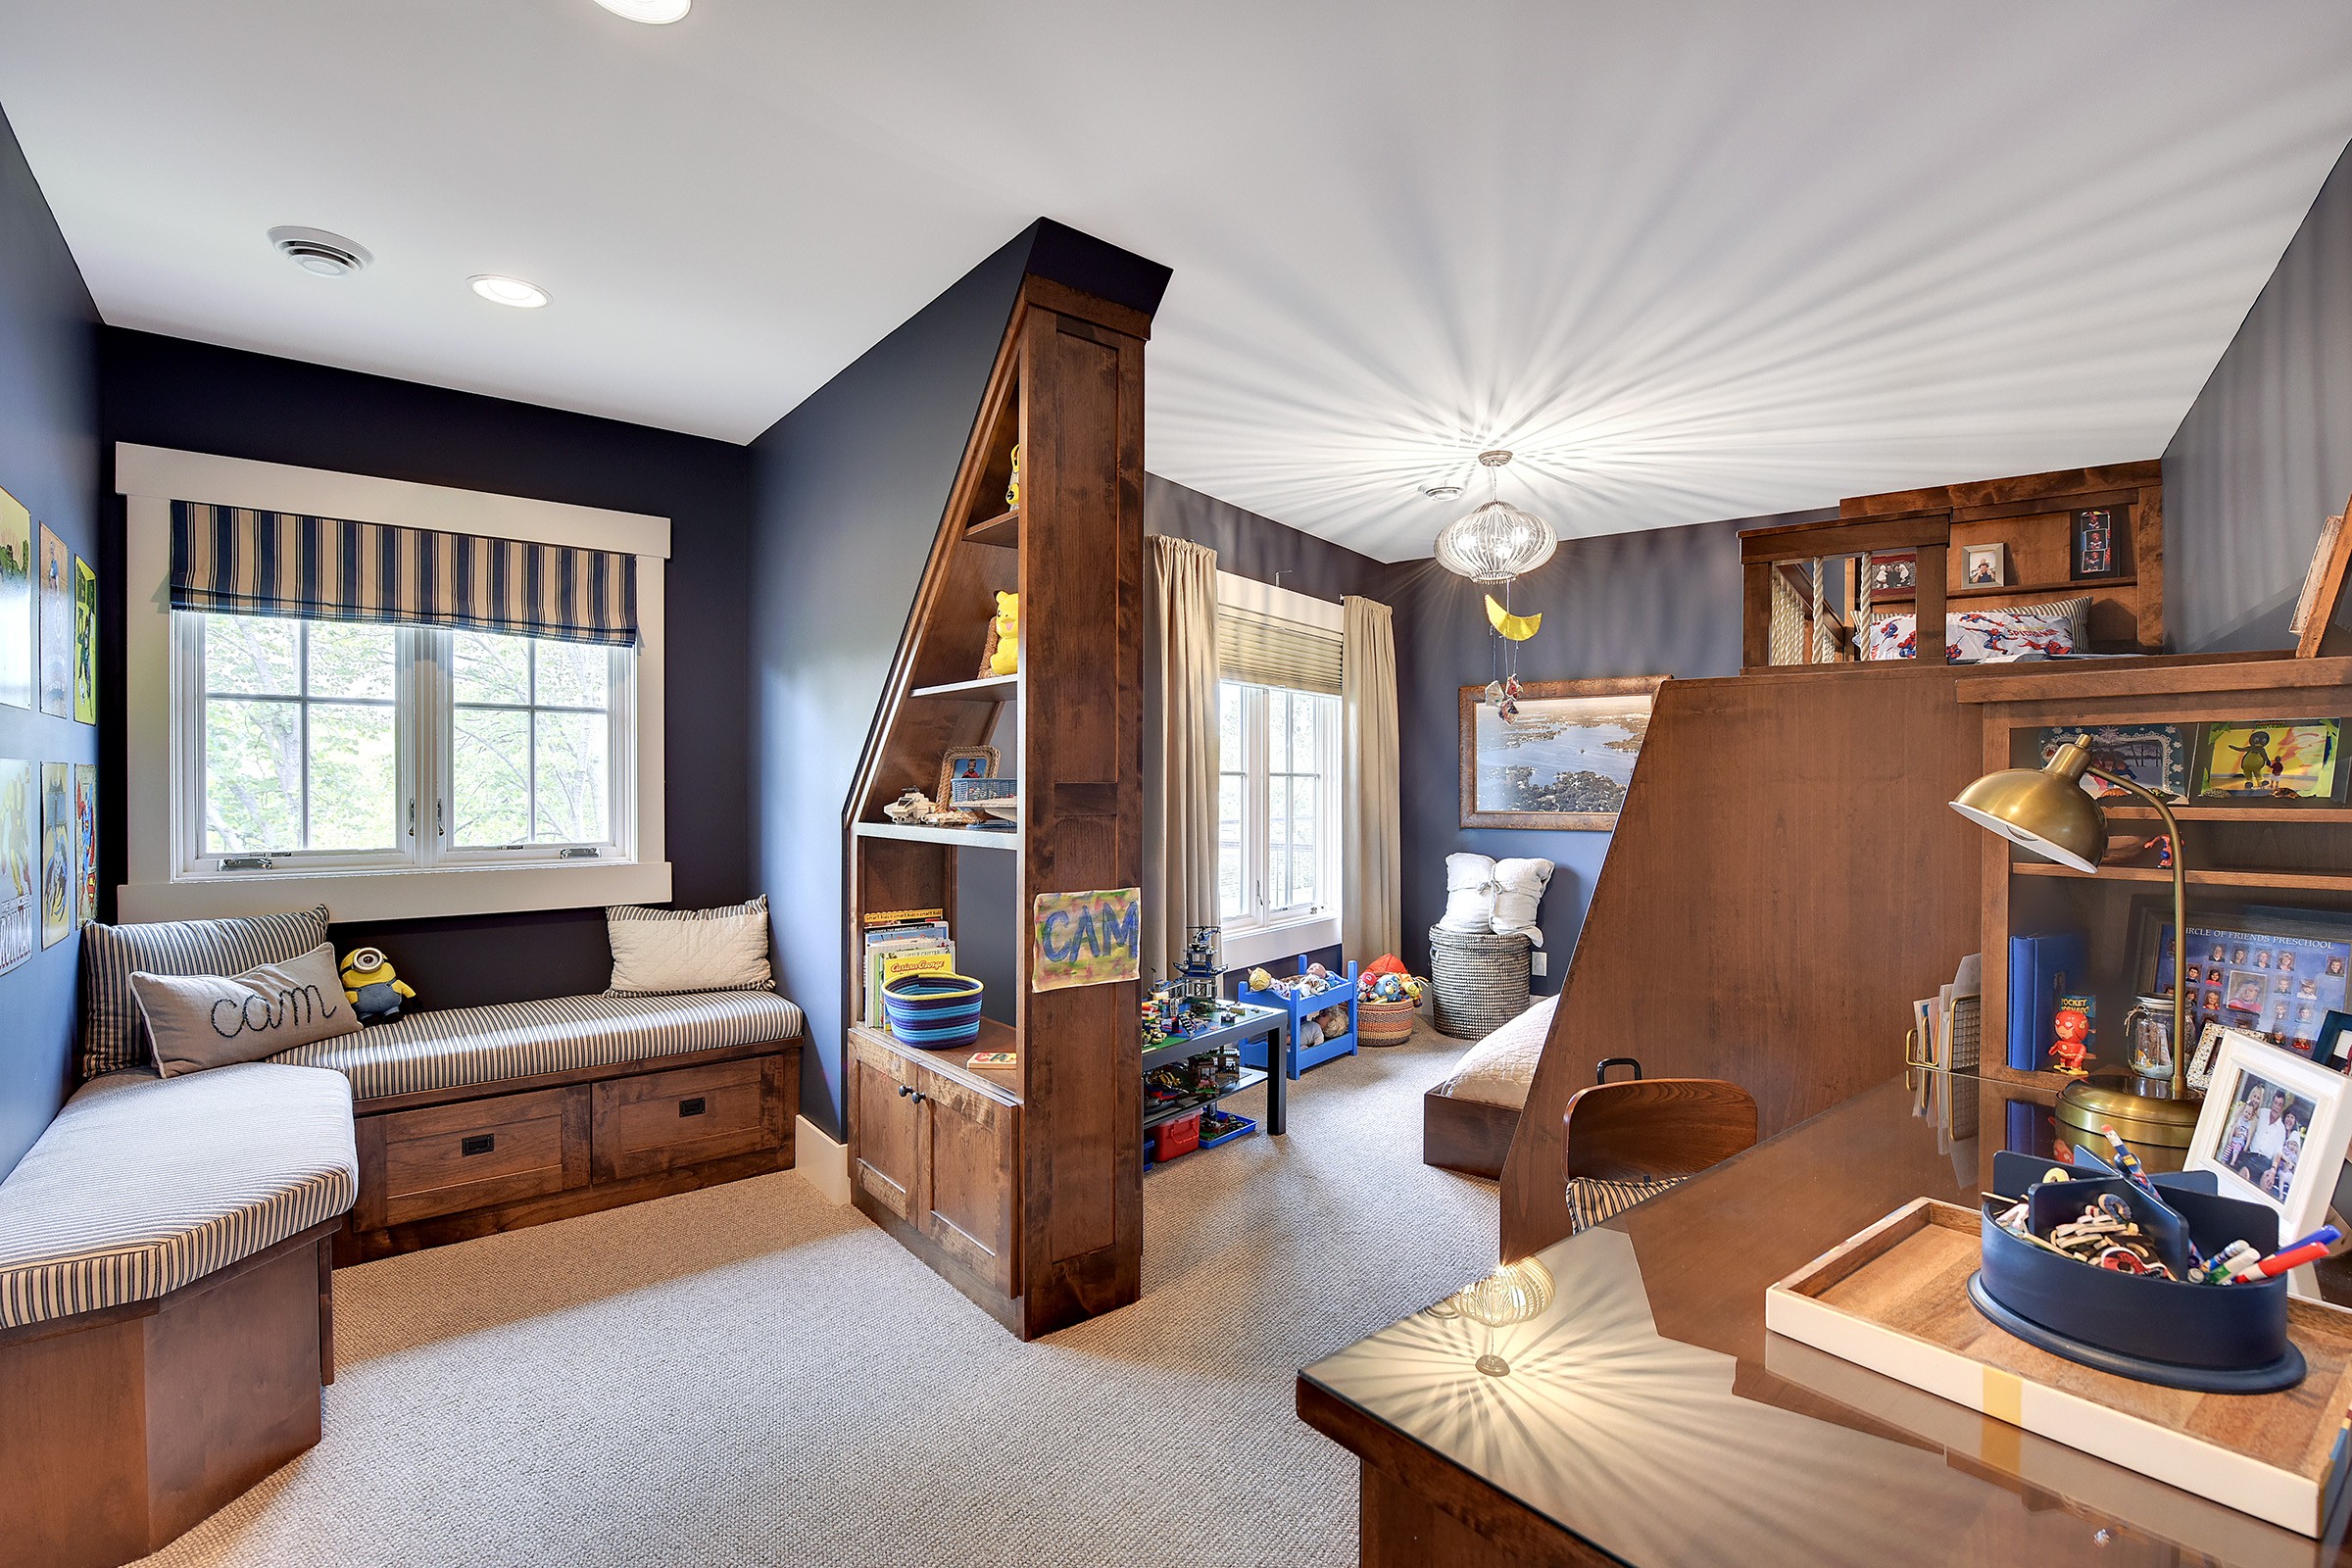 Dark blue child's bedroom with cushioned window bench, desk and shelving areas for toys.